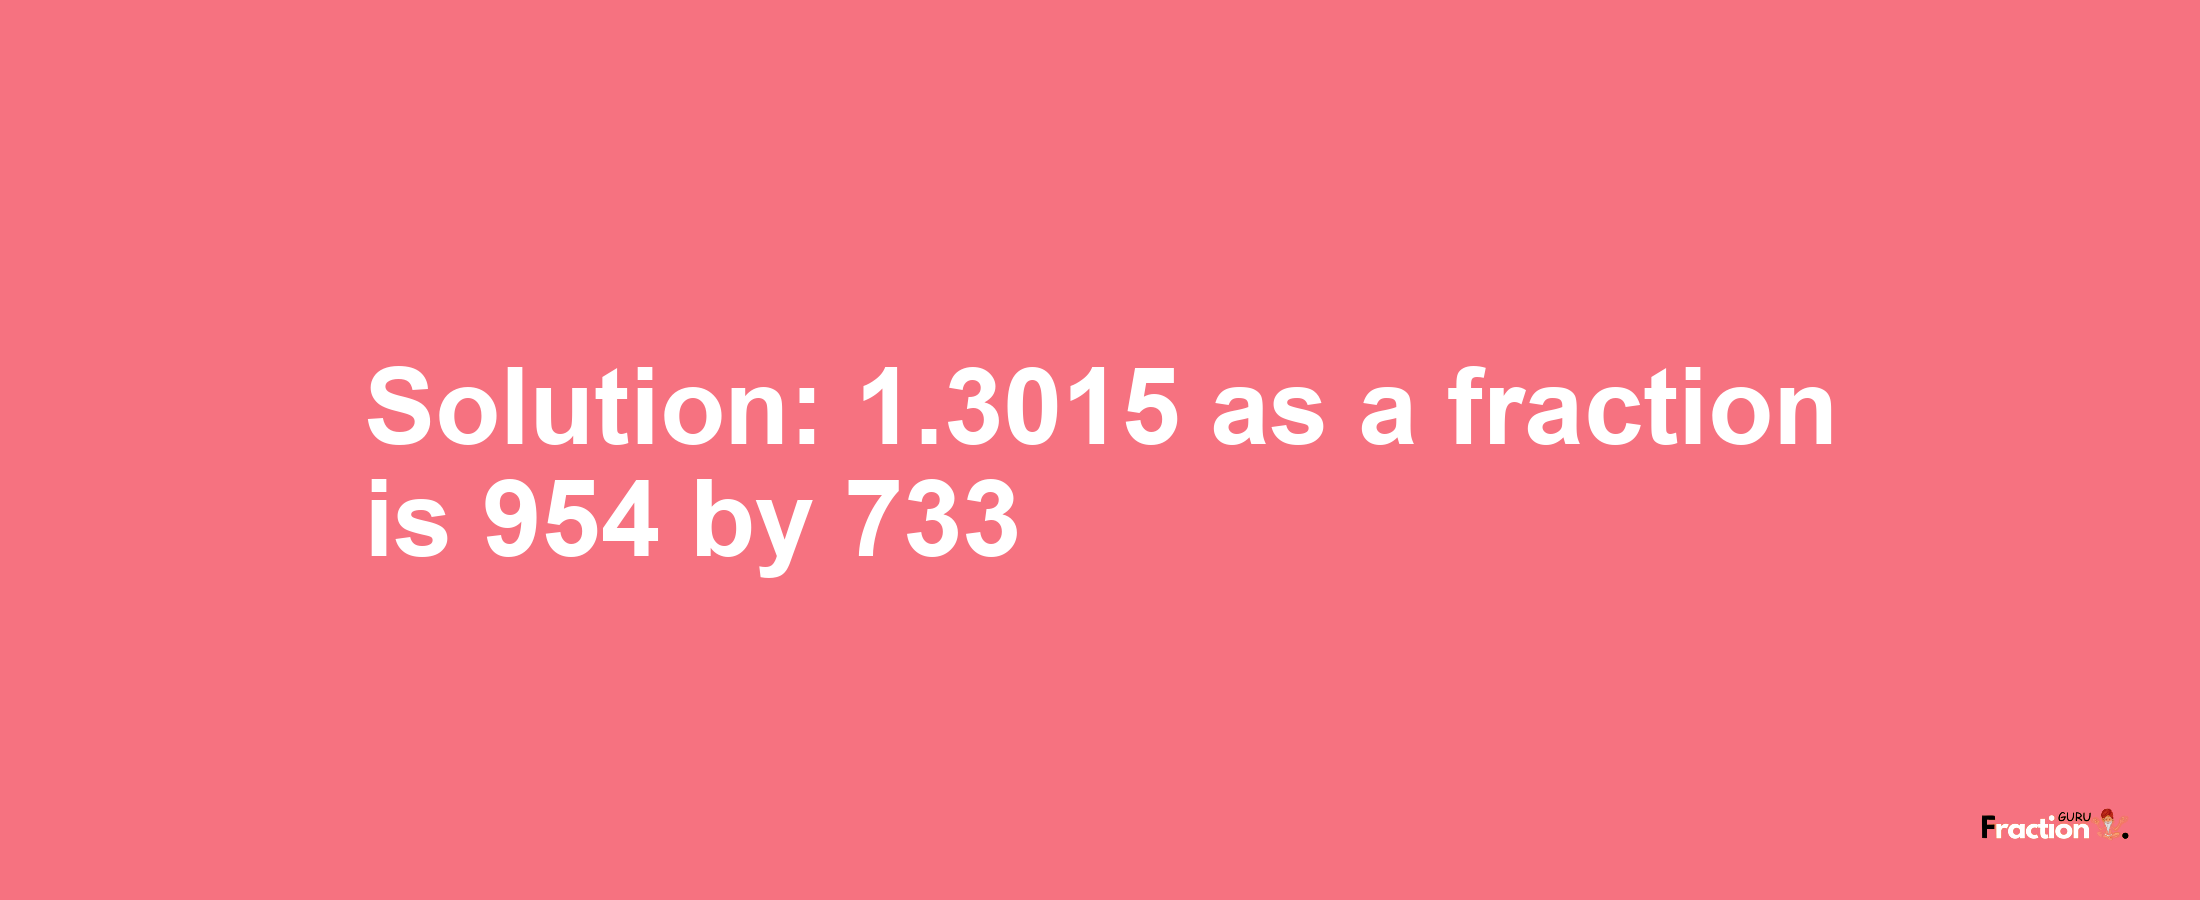 Solution:1.3015 as a fraction is 954/733